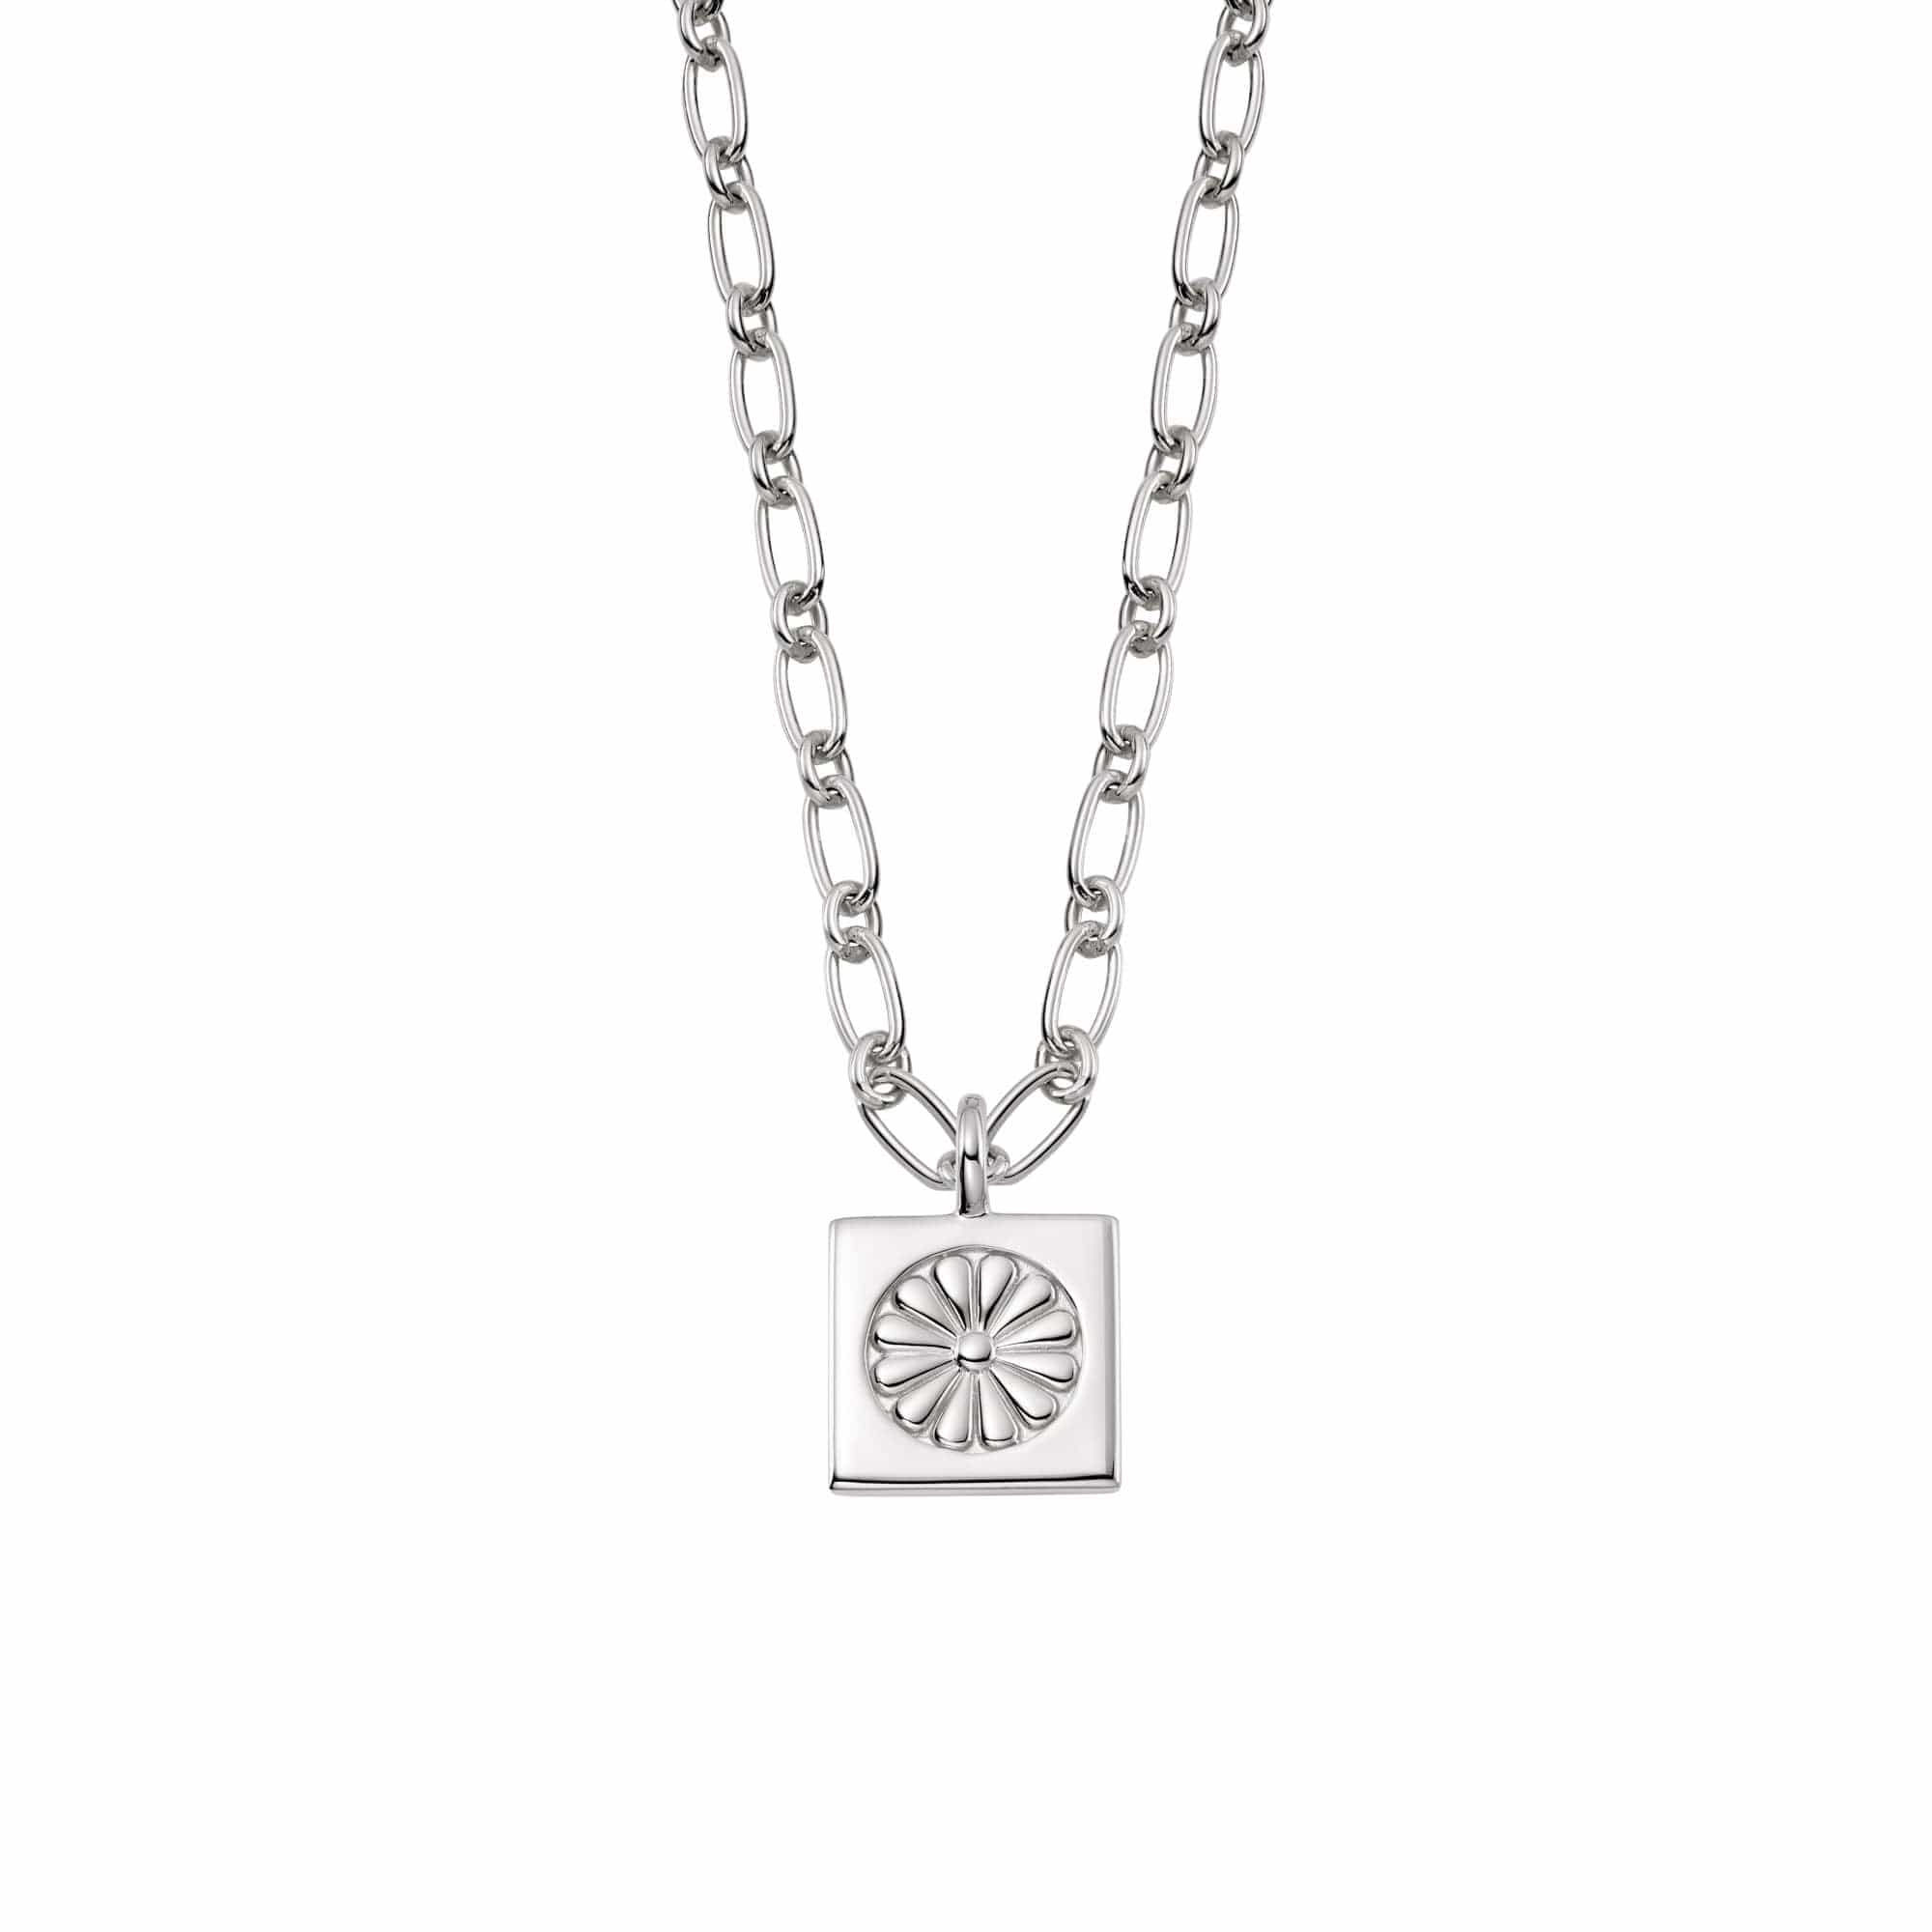 Daisy Bloom Medallion Necklace Sterling Silver – Daisy London